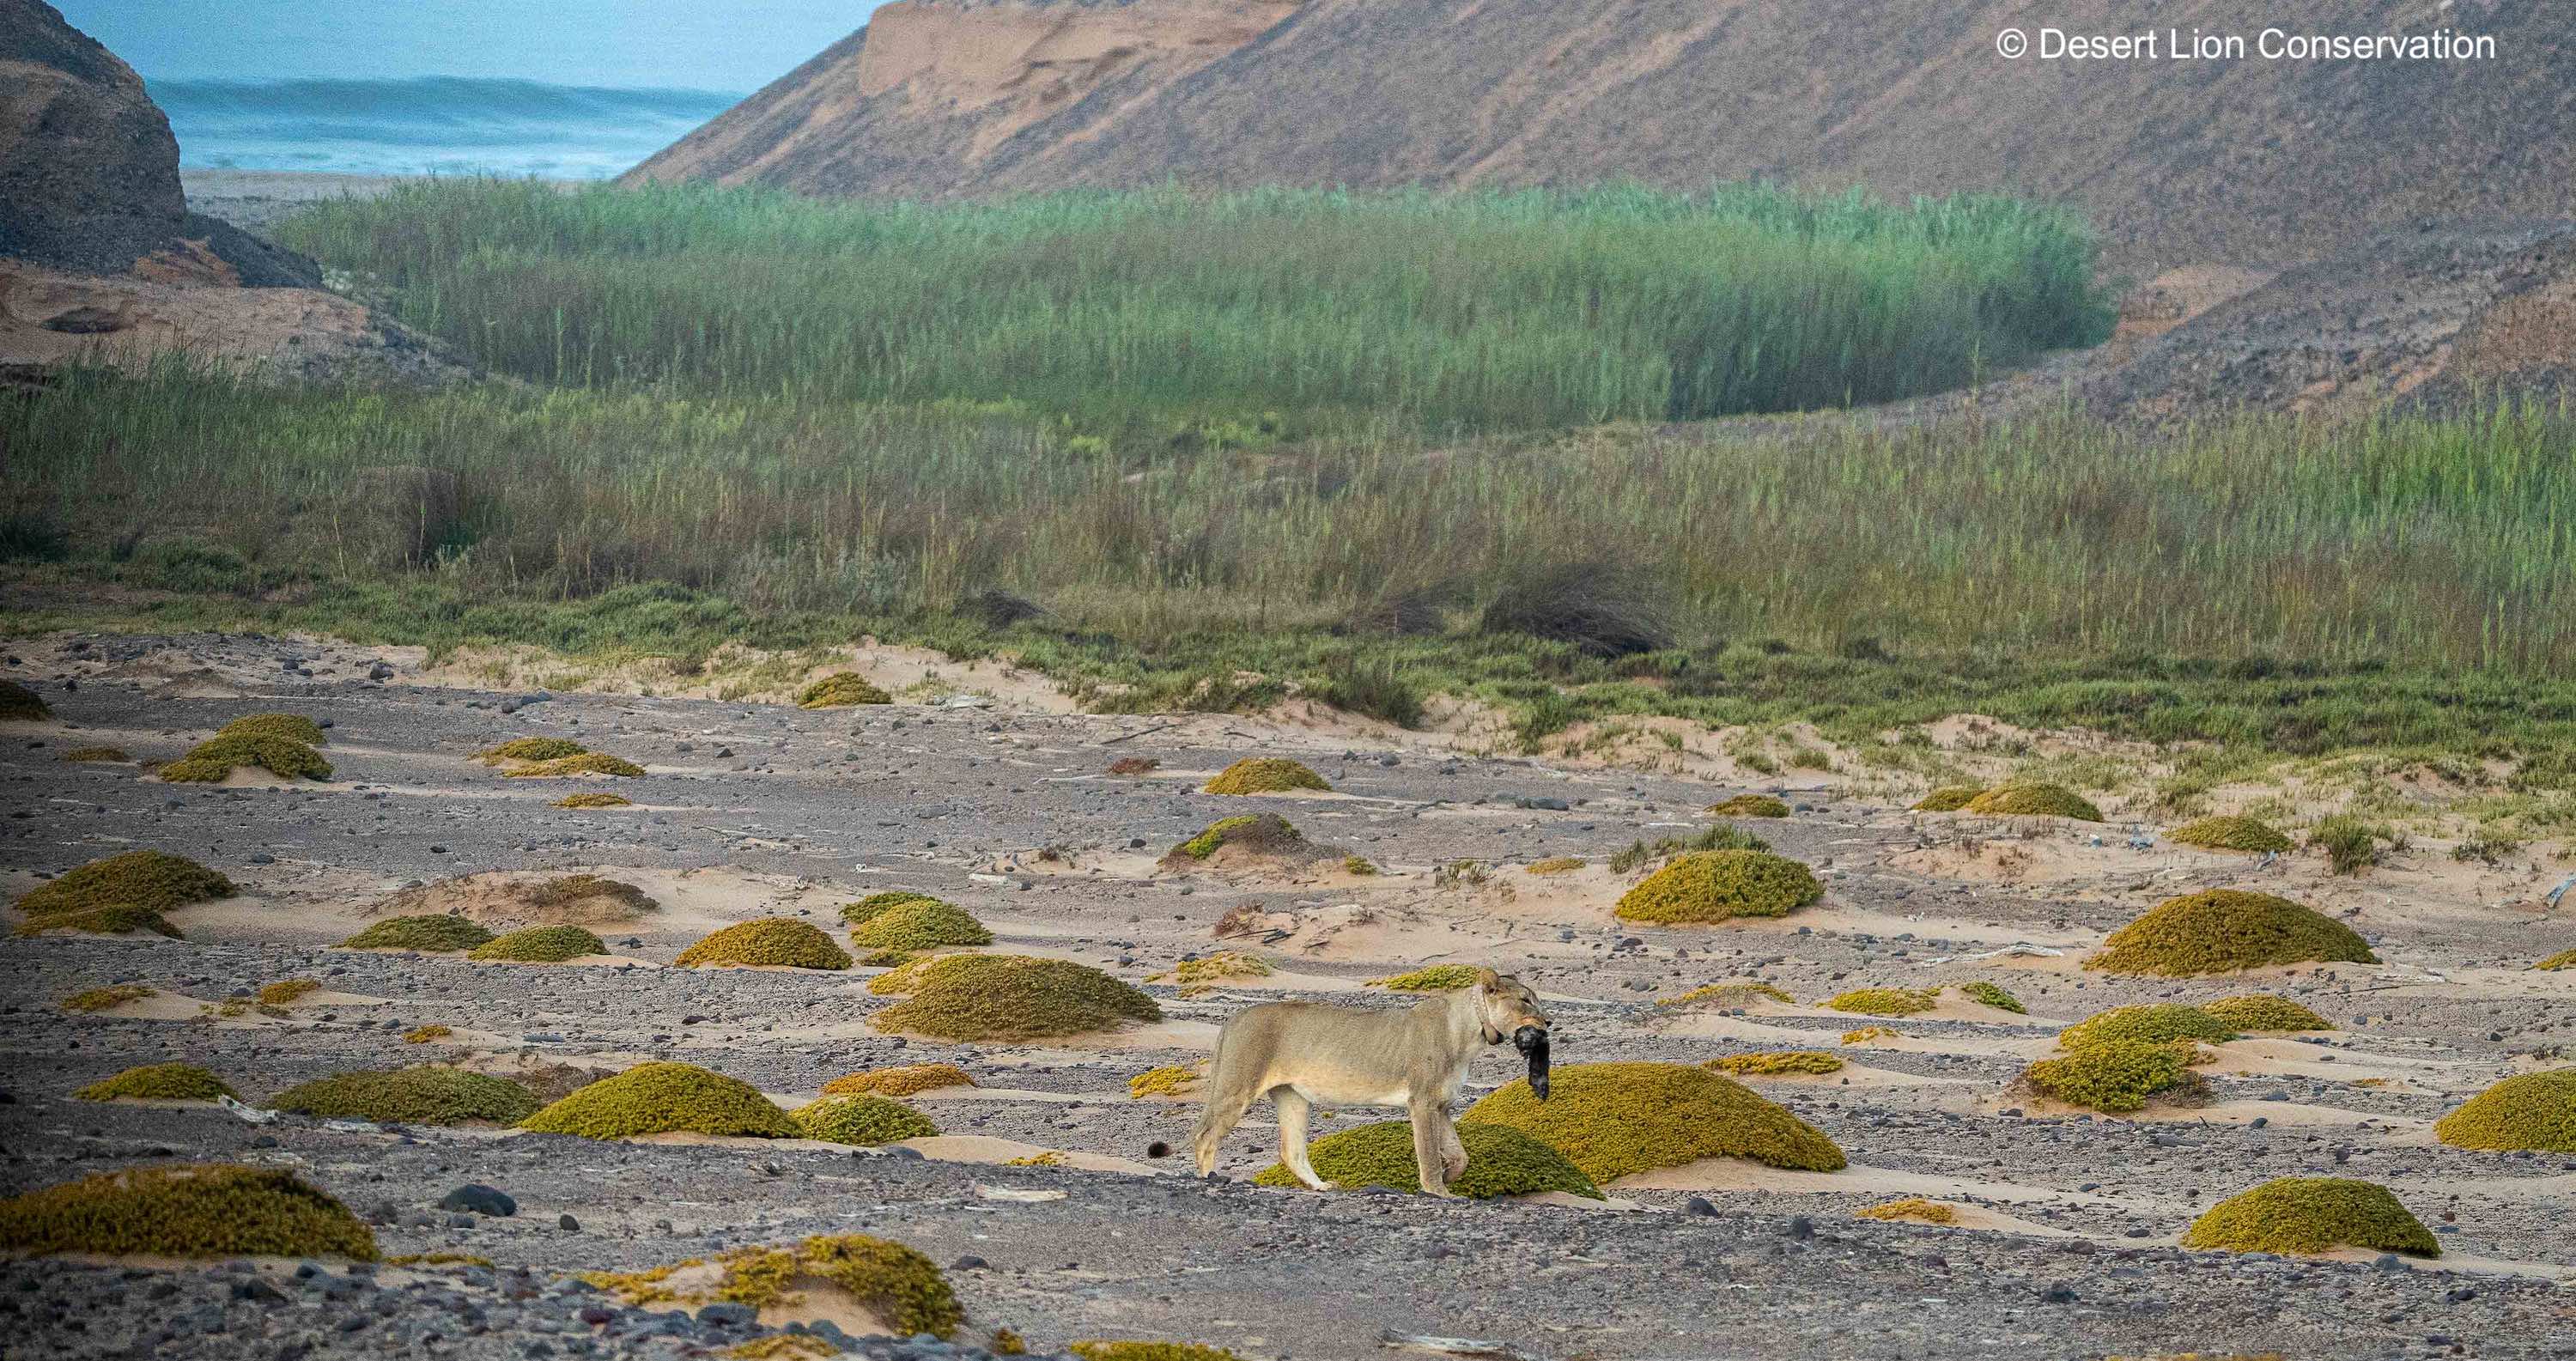 A lioness with a seal between her jaws, and the ocean in the background.